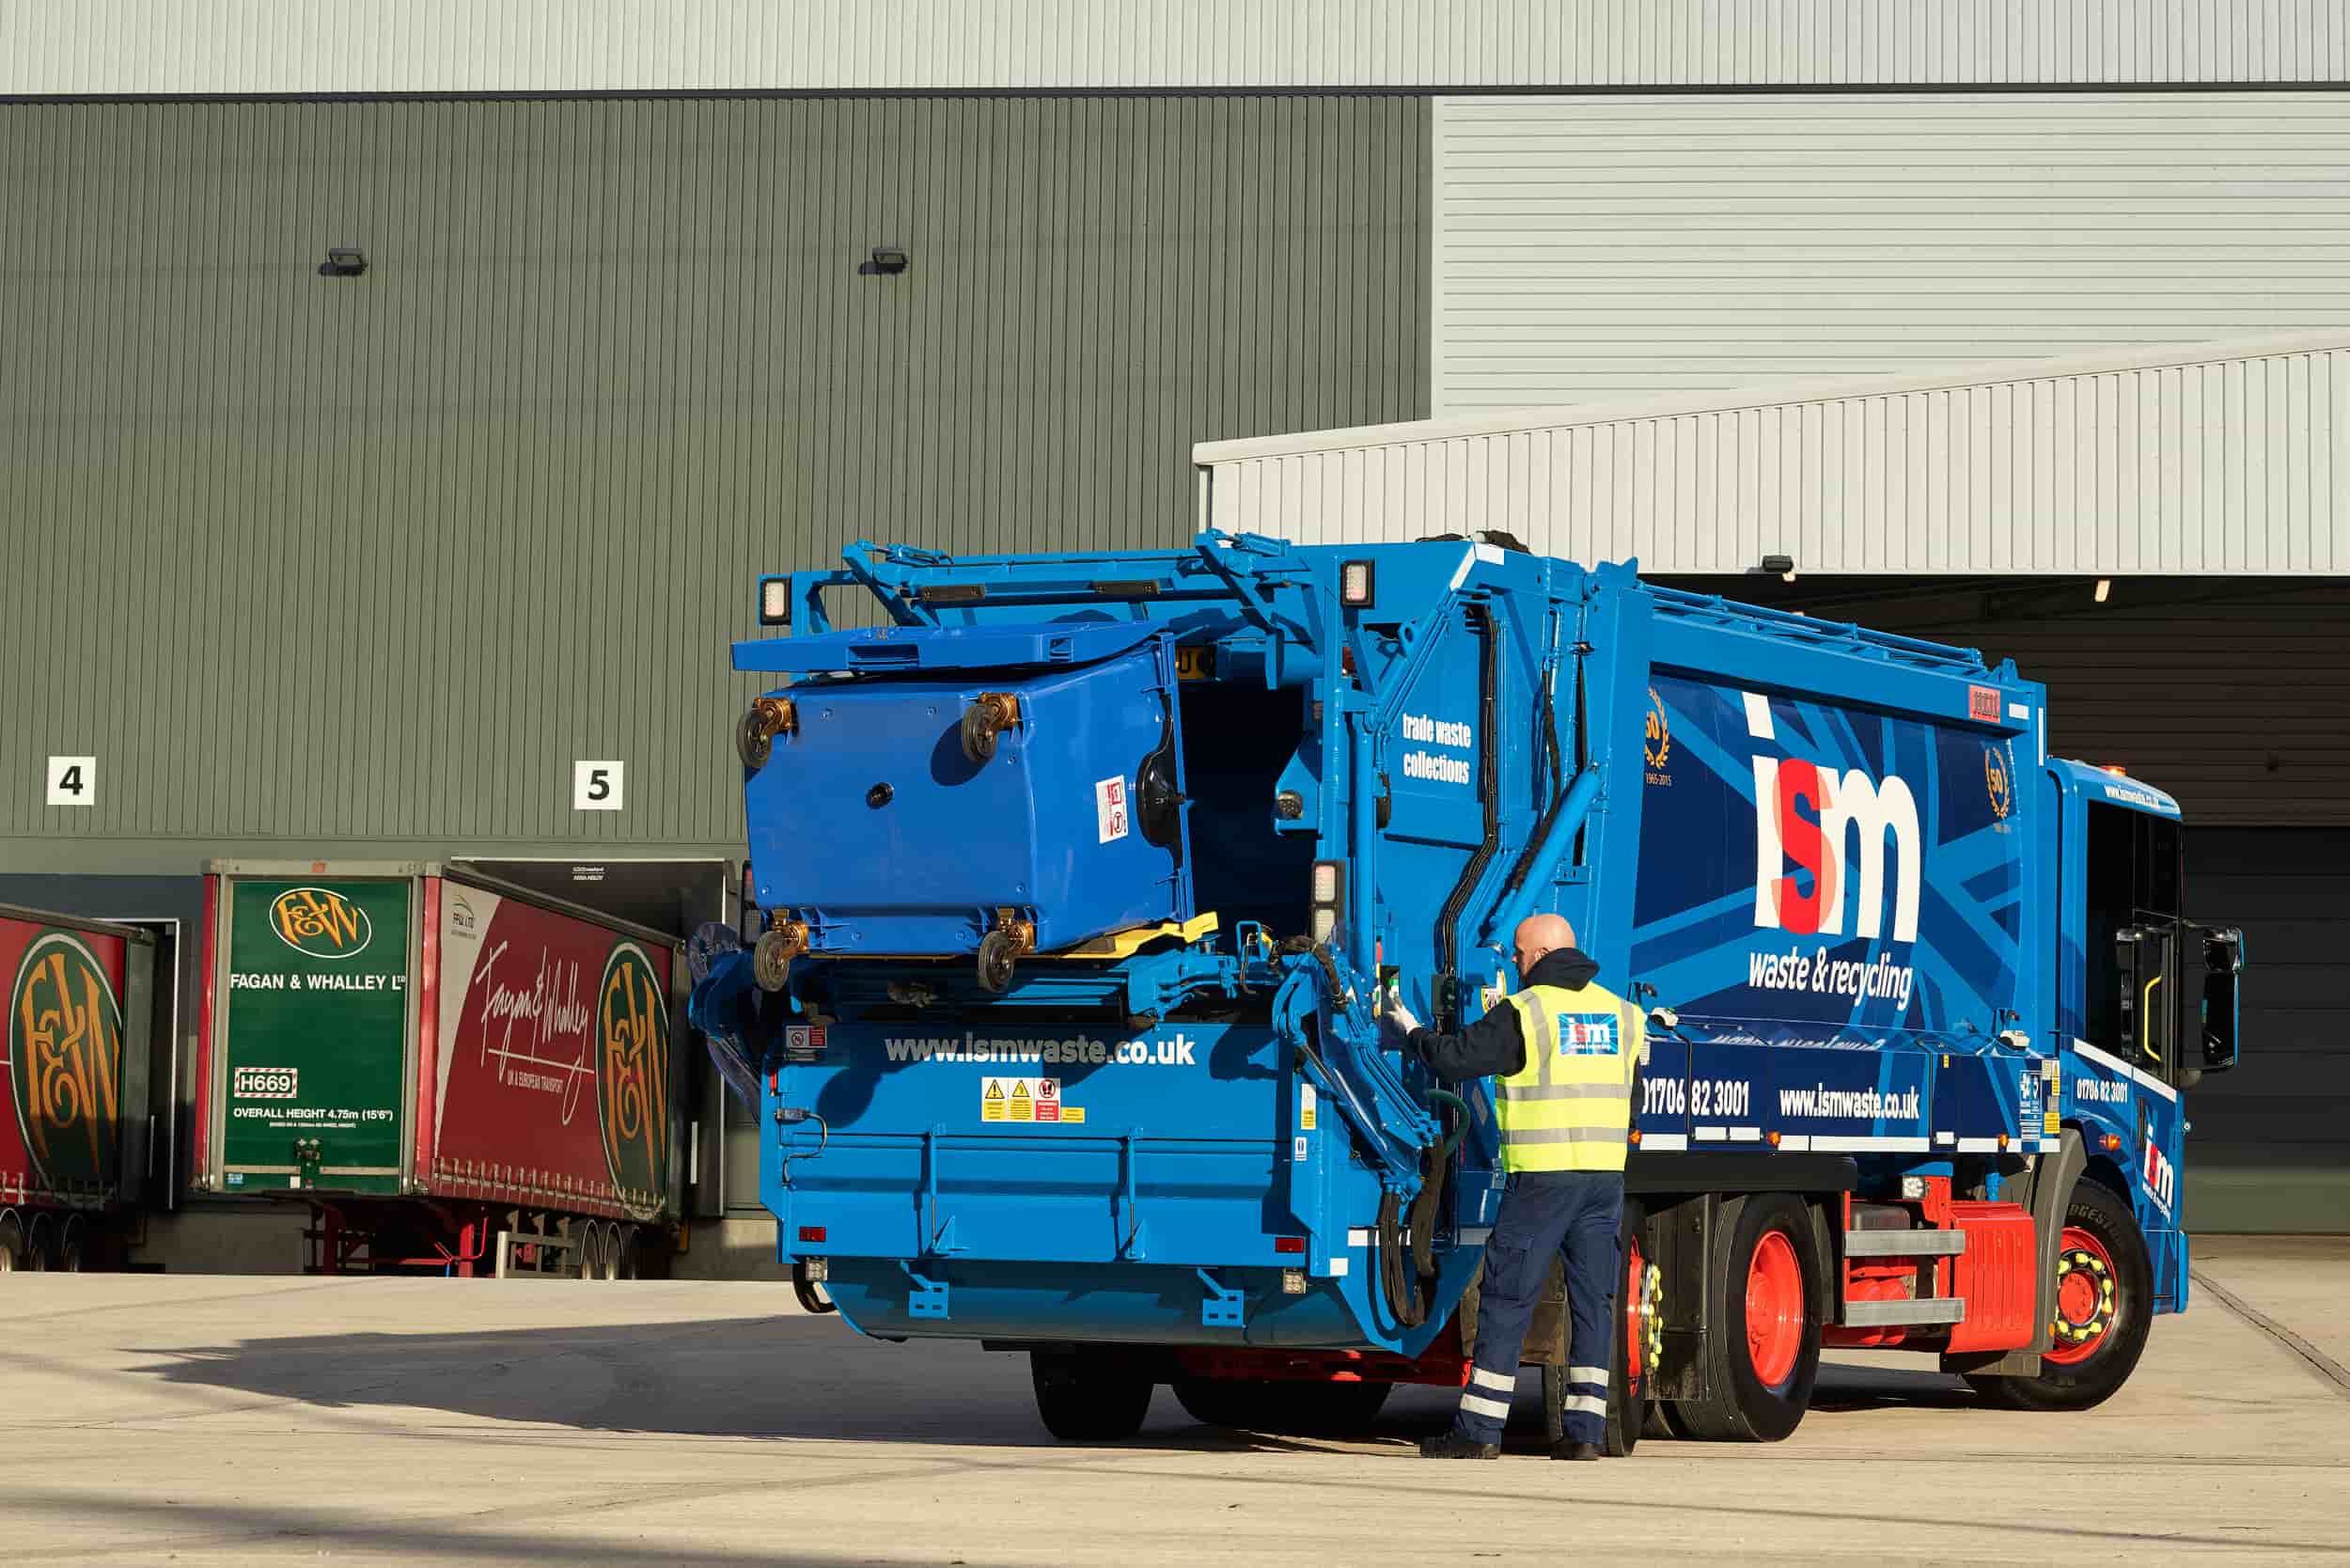 Bin collections at customer's site